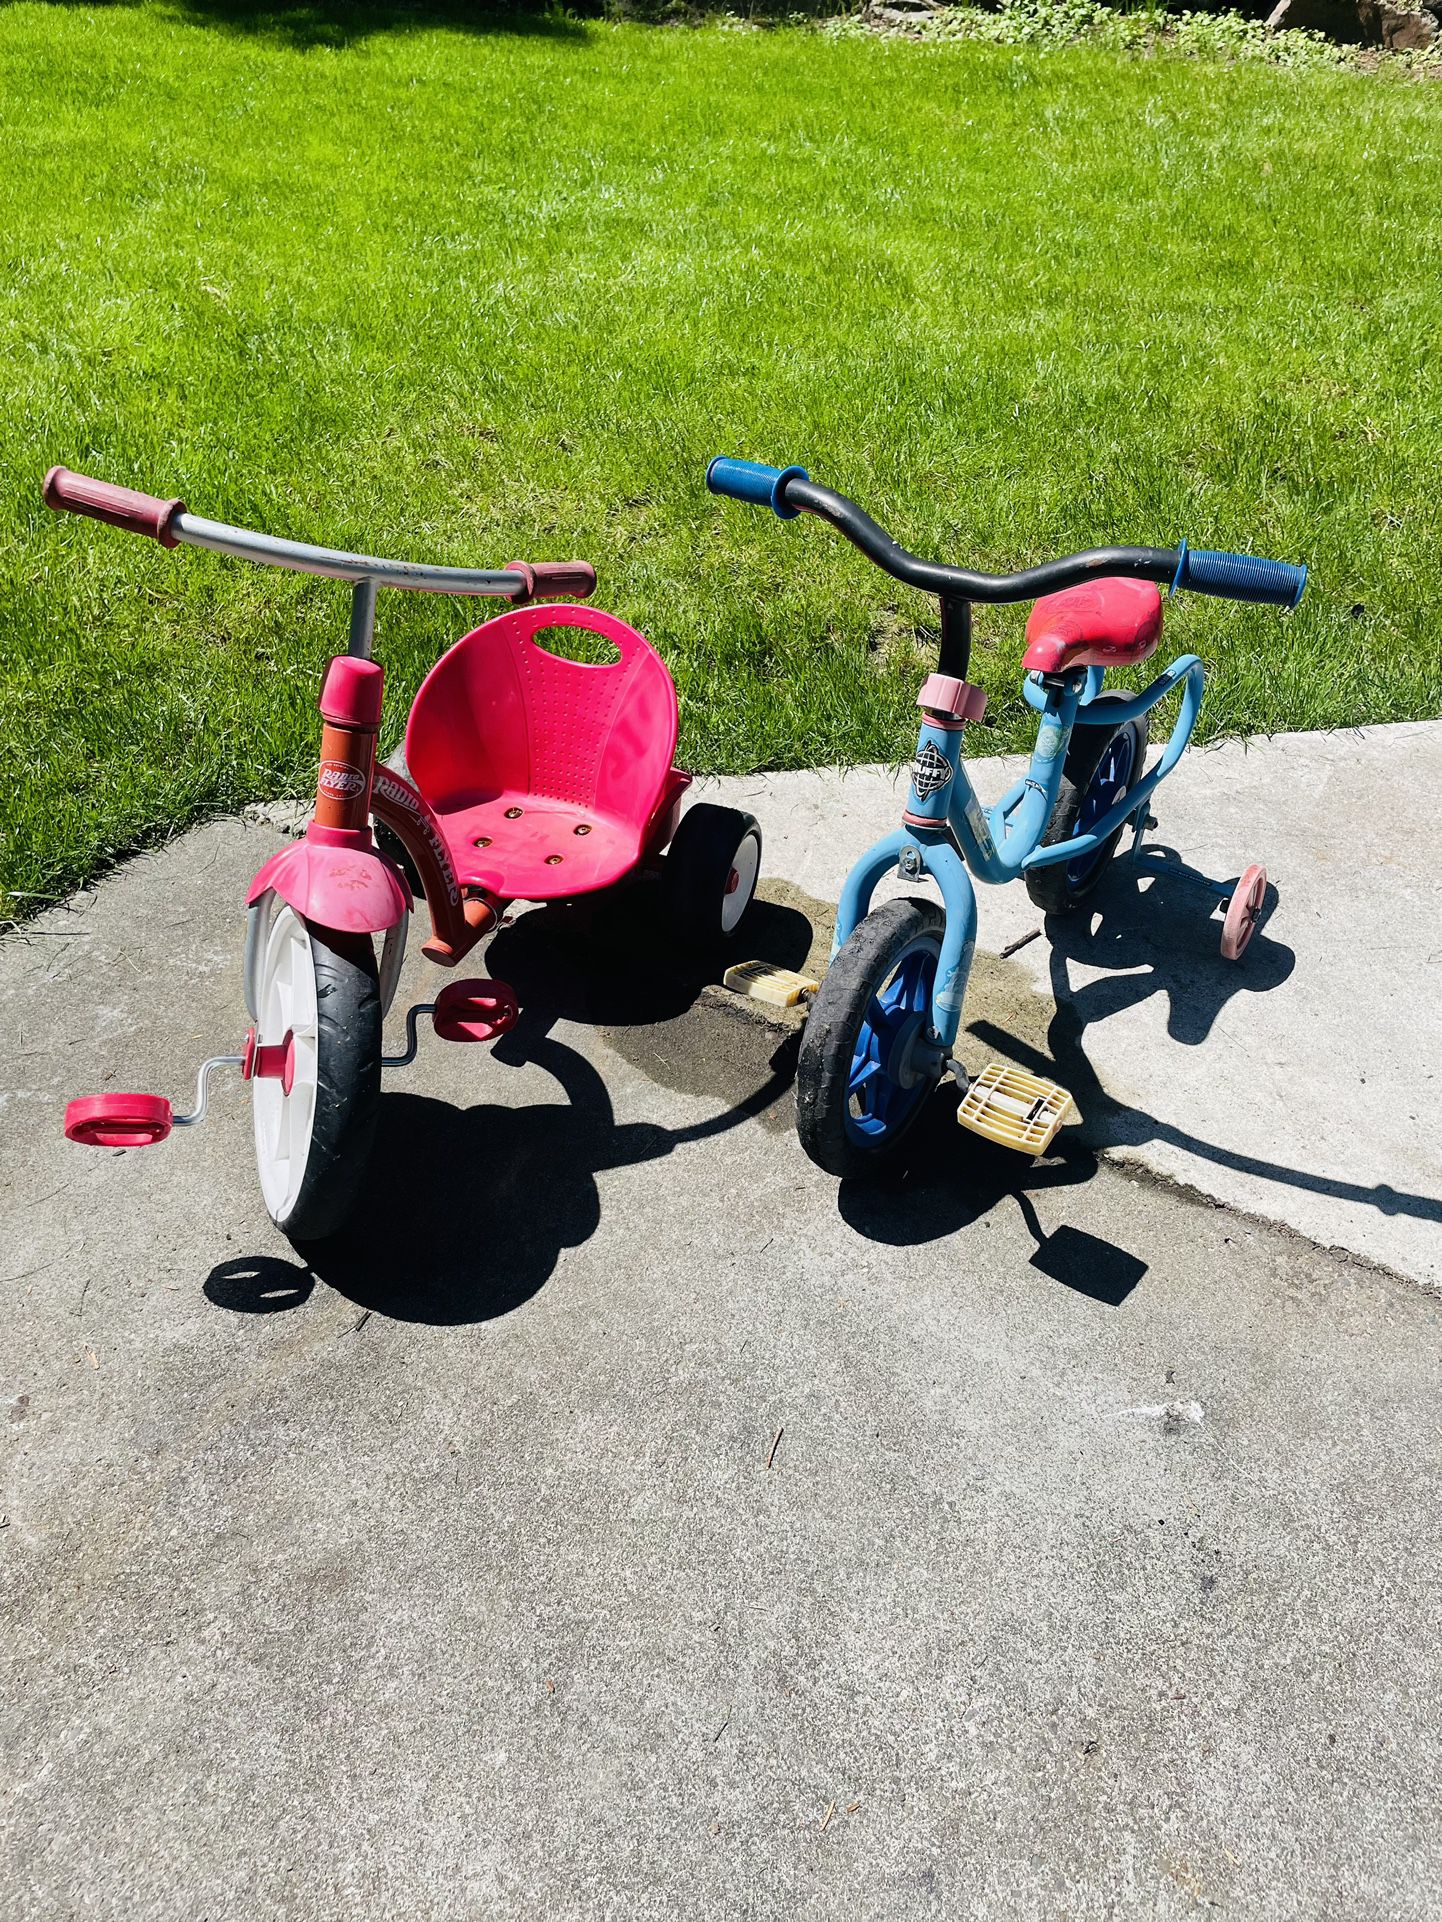 Radio Flyer and Little Blue Tricycles